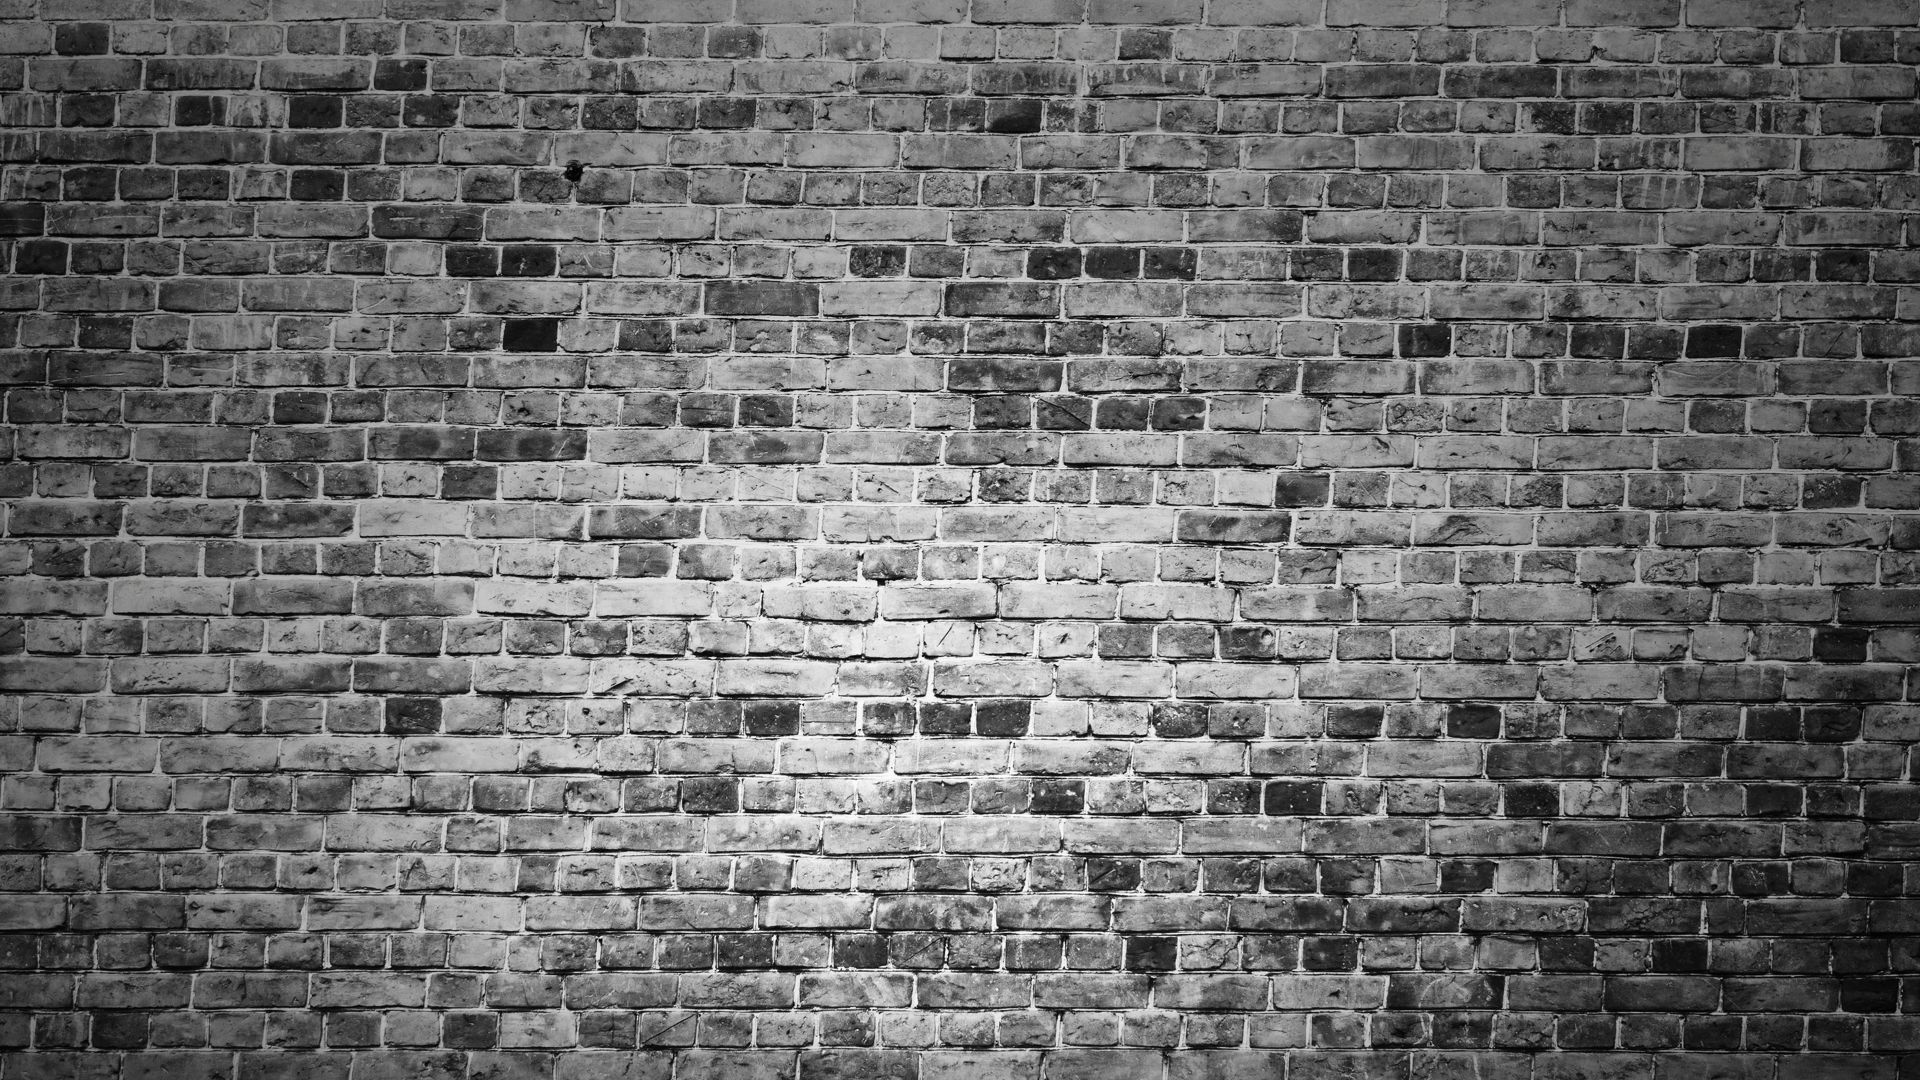 Desktop wallpaper brick wall, black and white, HD image, picture, background, ed87d0